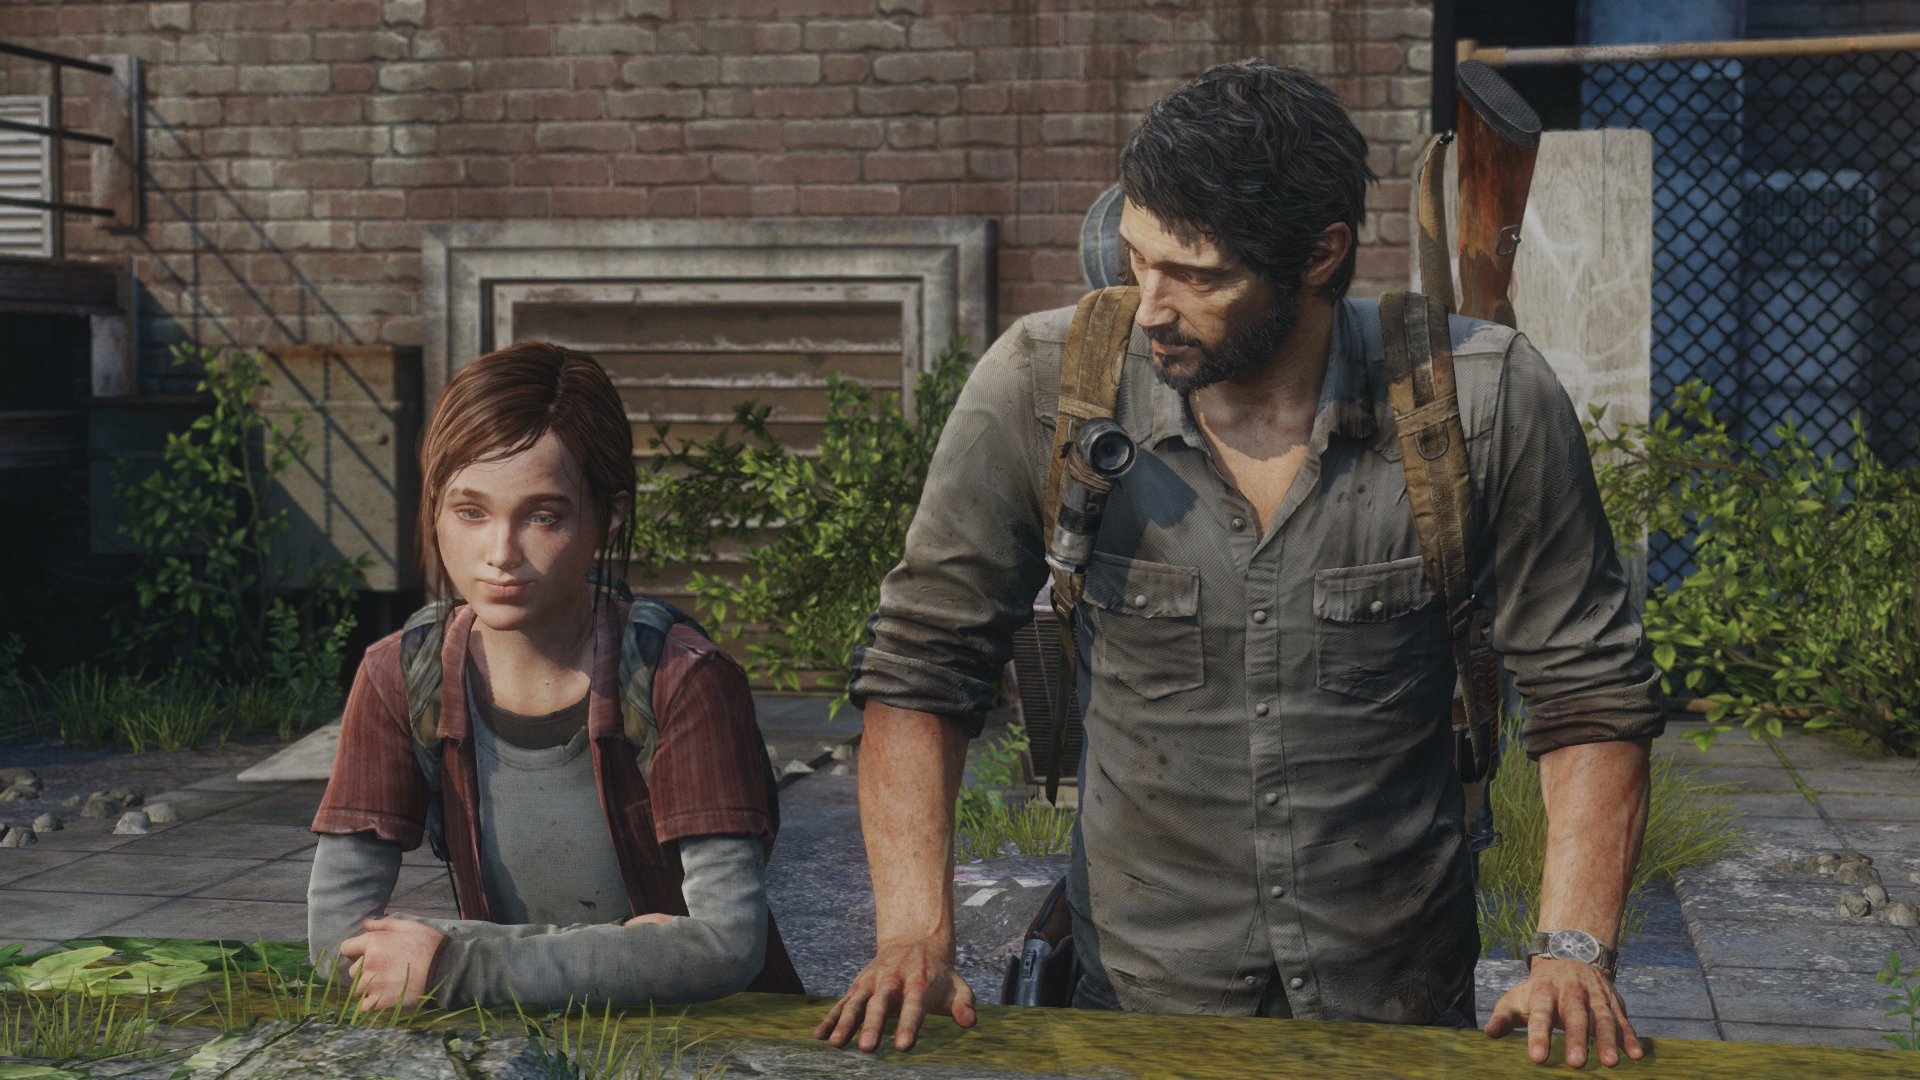 The Last of Us: Remastered wallpaper 02 1920x1080